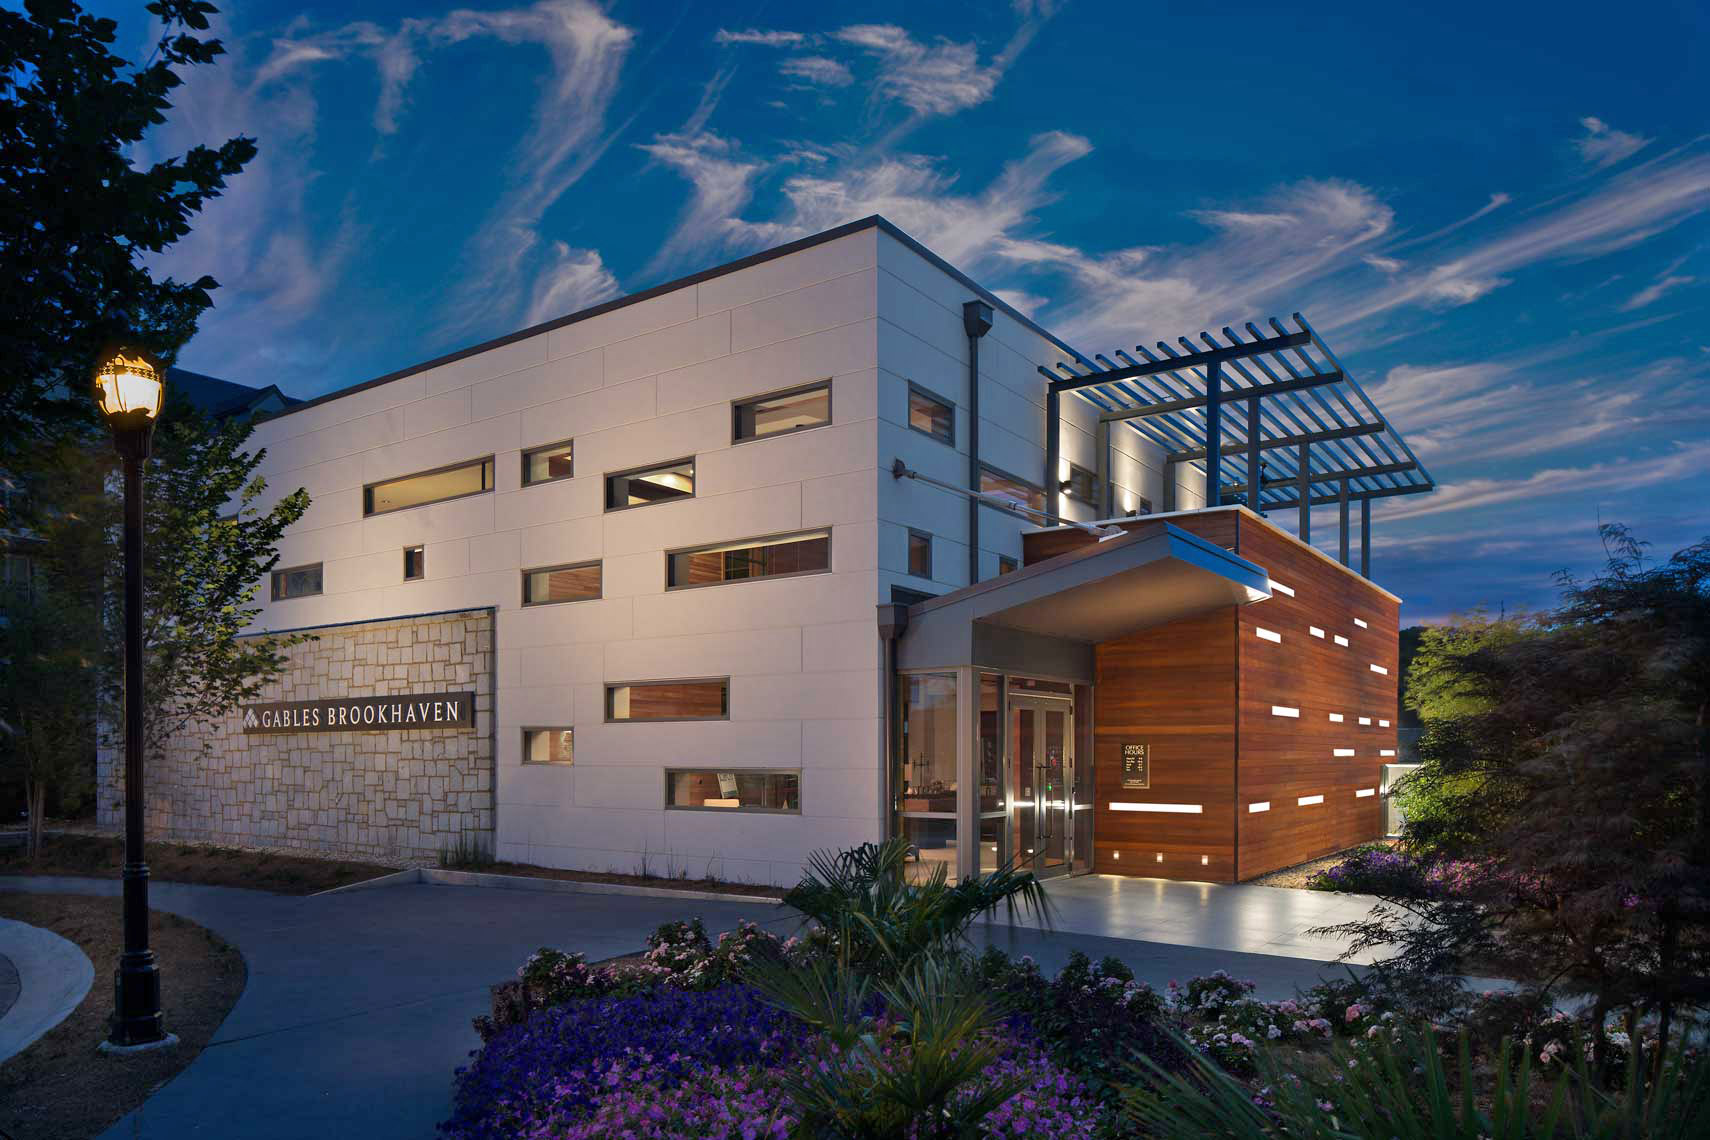 An exterior twilight view of the Gables Brookhaven Leasing Office, showing bold design and lighting